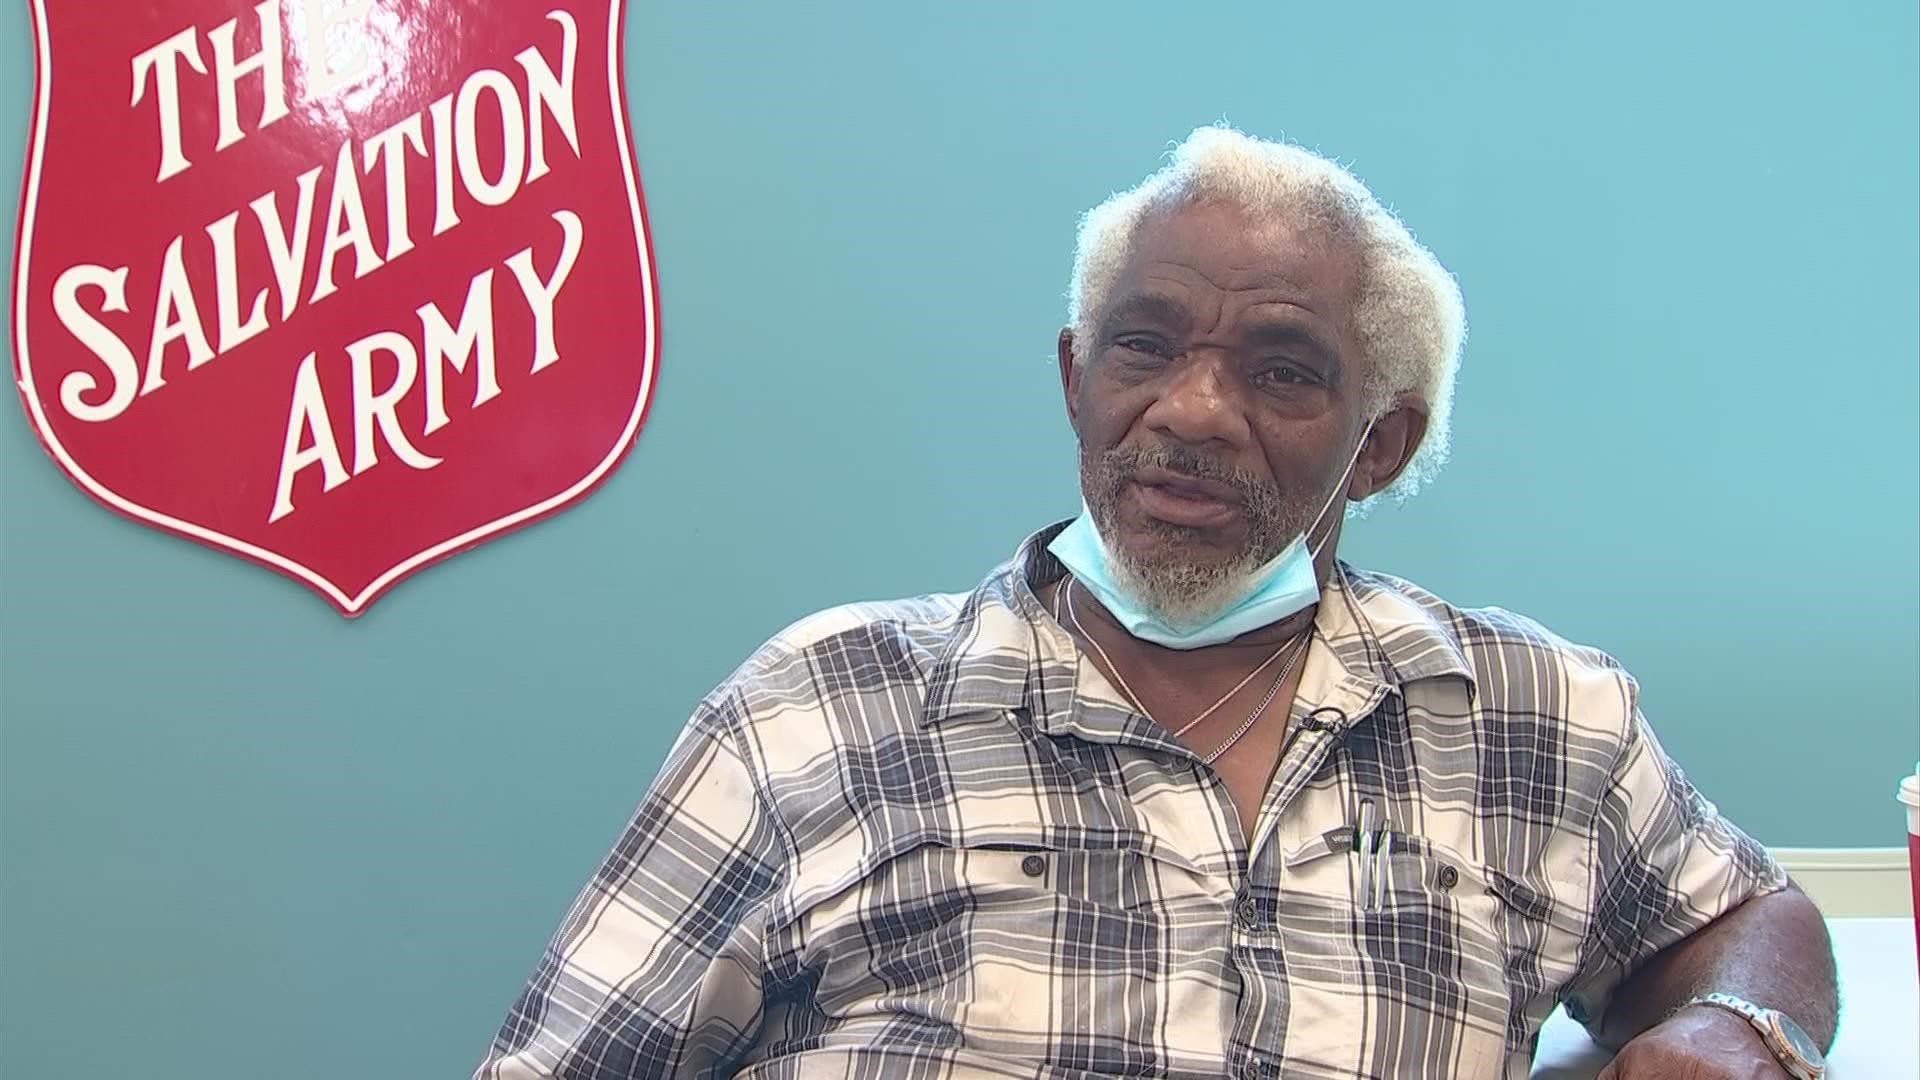 When Marvin Houston Sr. and his wife along with their 11 children fell on hard times, the Salvation Army jumped in to help in 2015.